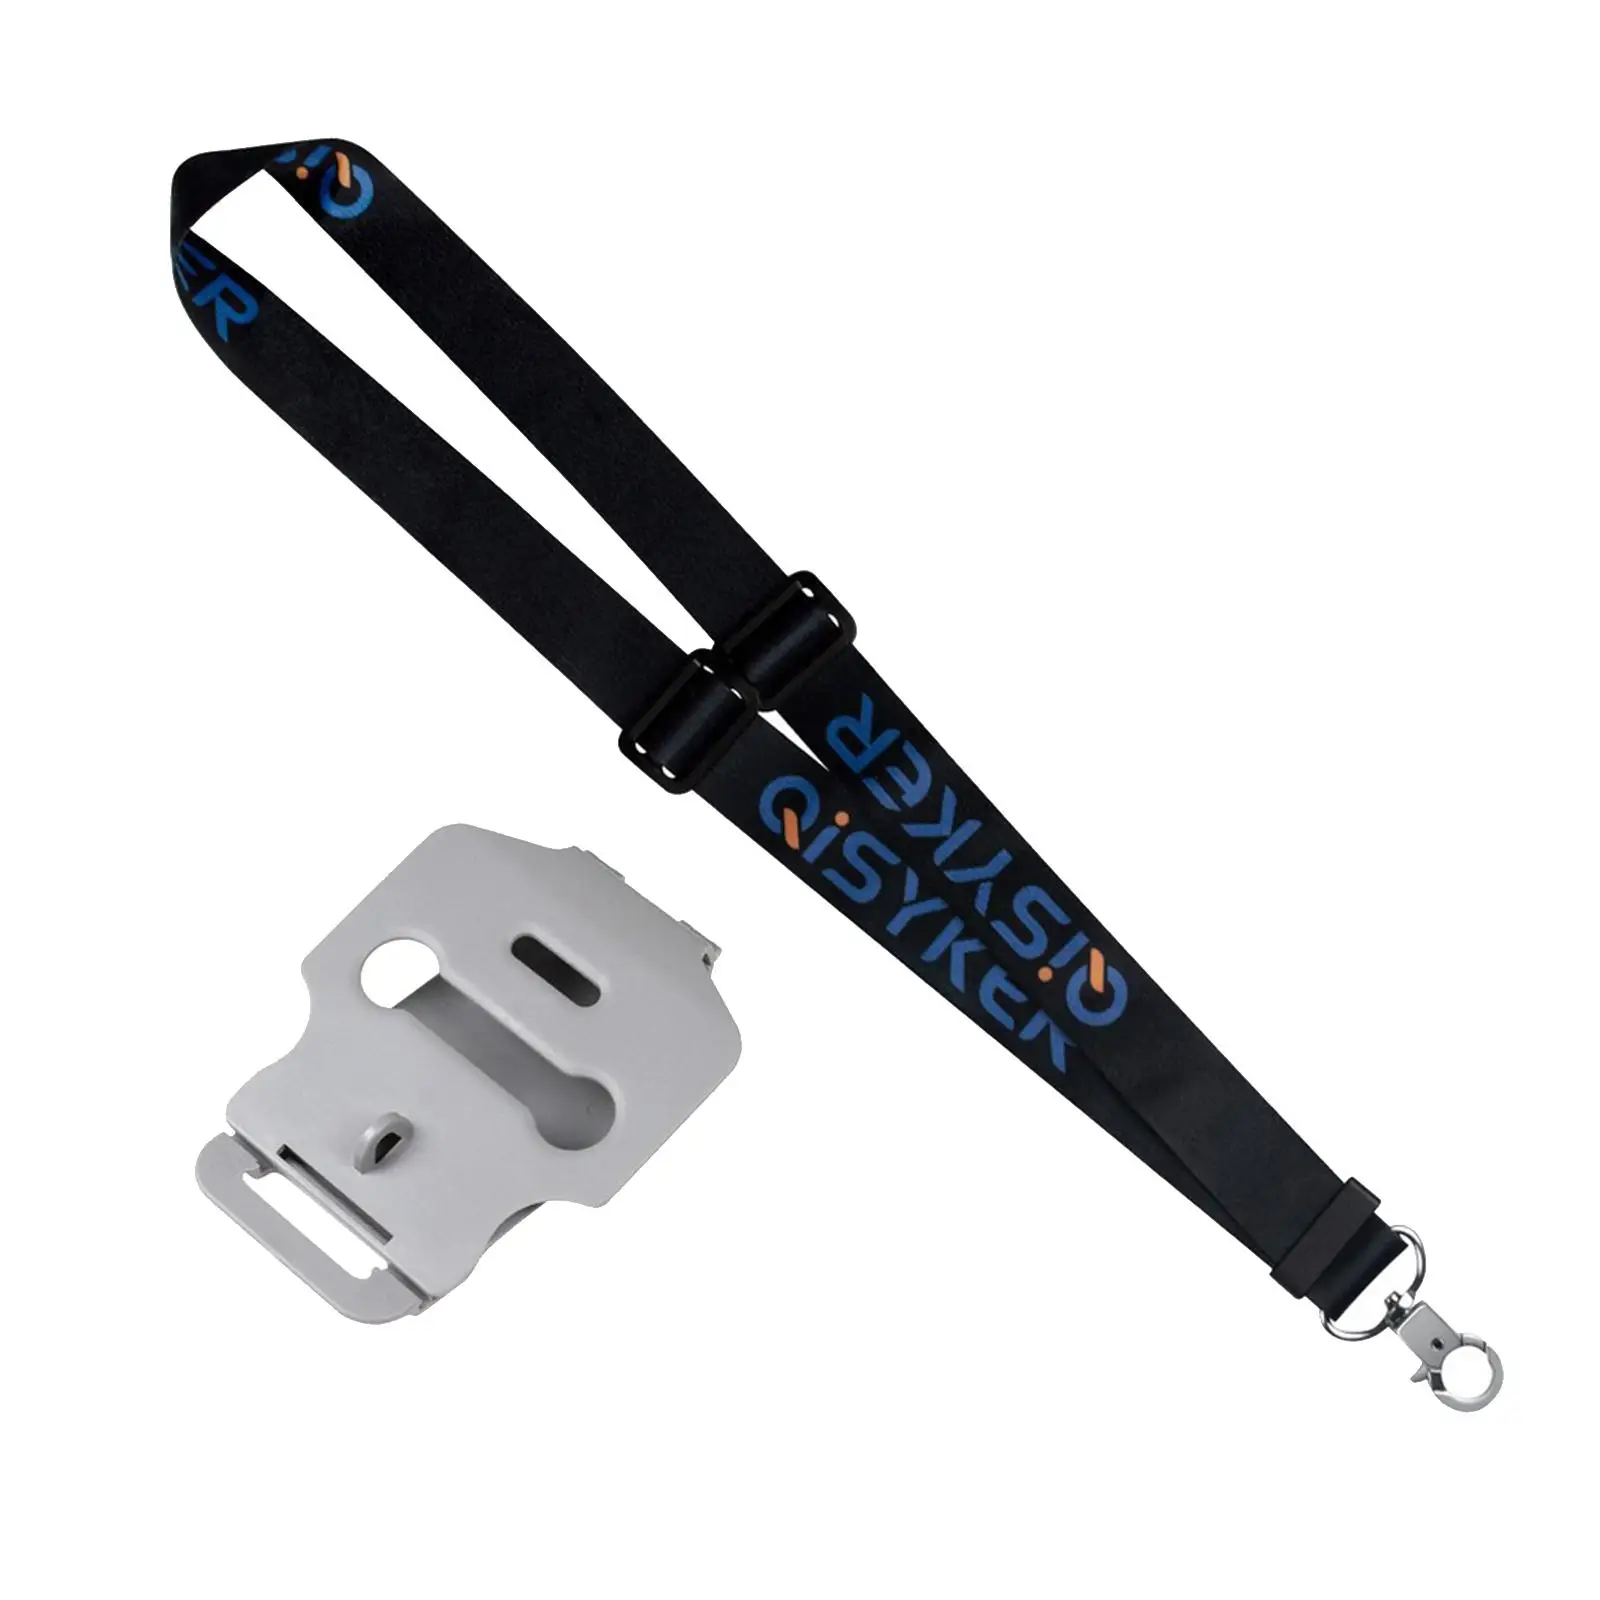 Smart Remote Control Lanyard with Bracket 36cm~63.5cm Release Hands Adjustable Remote Neck Strap for Quadcopter Accessories